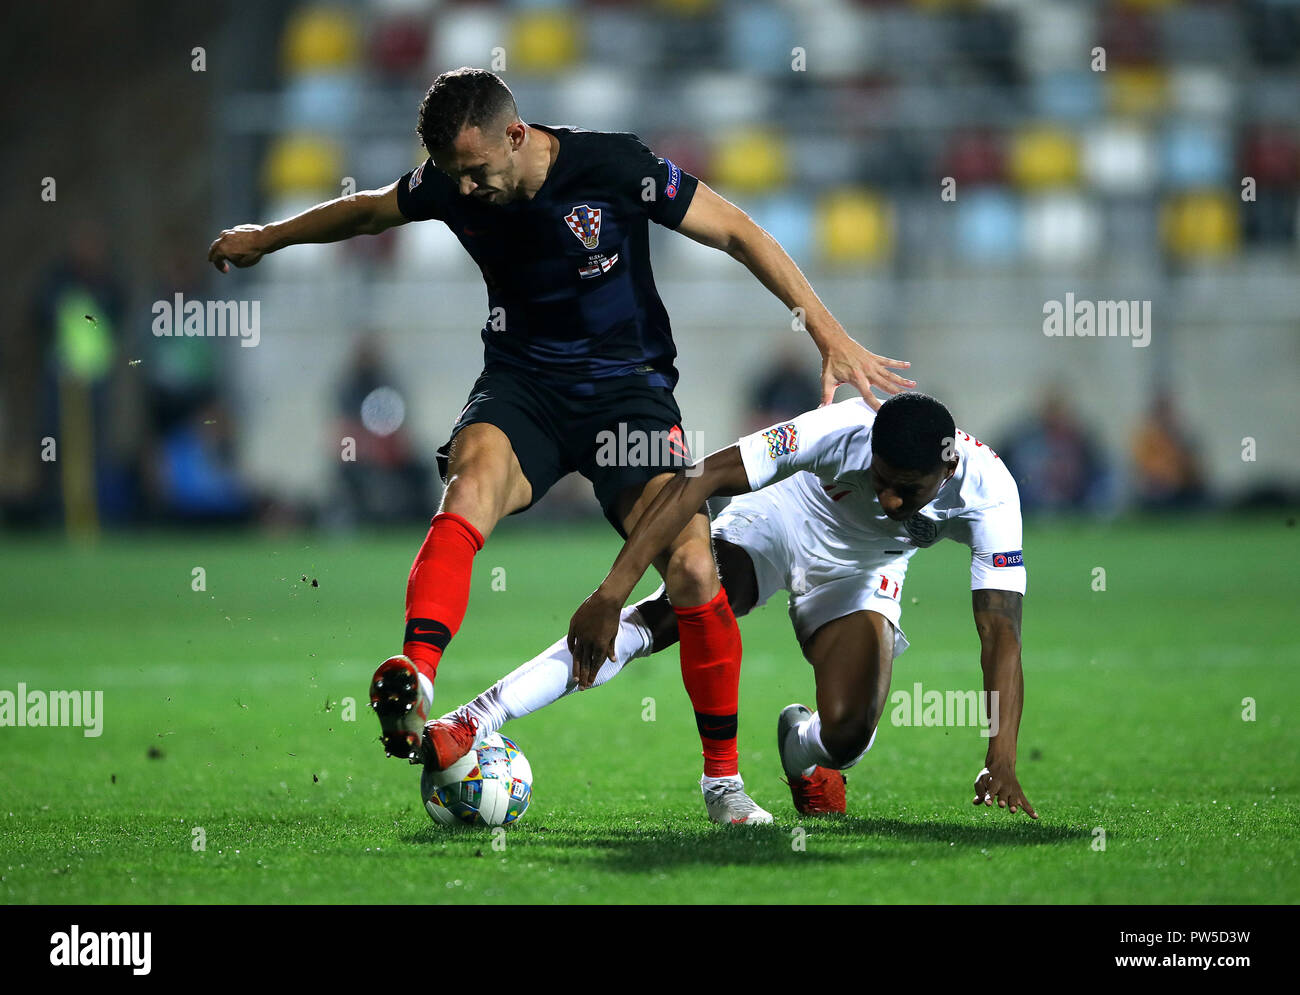 Croatia's Ivan Perisic (left) and England's Marcus Rashford (right) battle for the ball during the UEFA Nations League match at Stadion HNK Rijeka in Croatia. Stock Photo